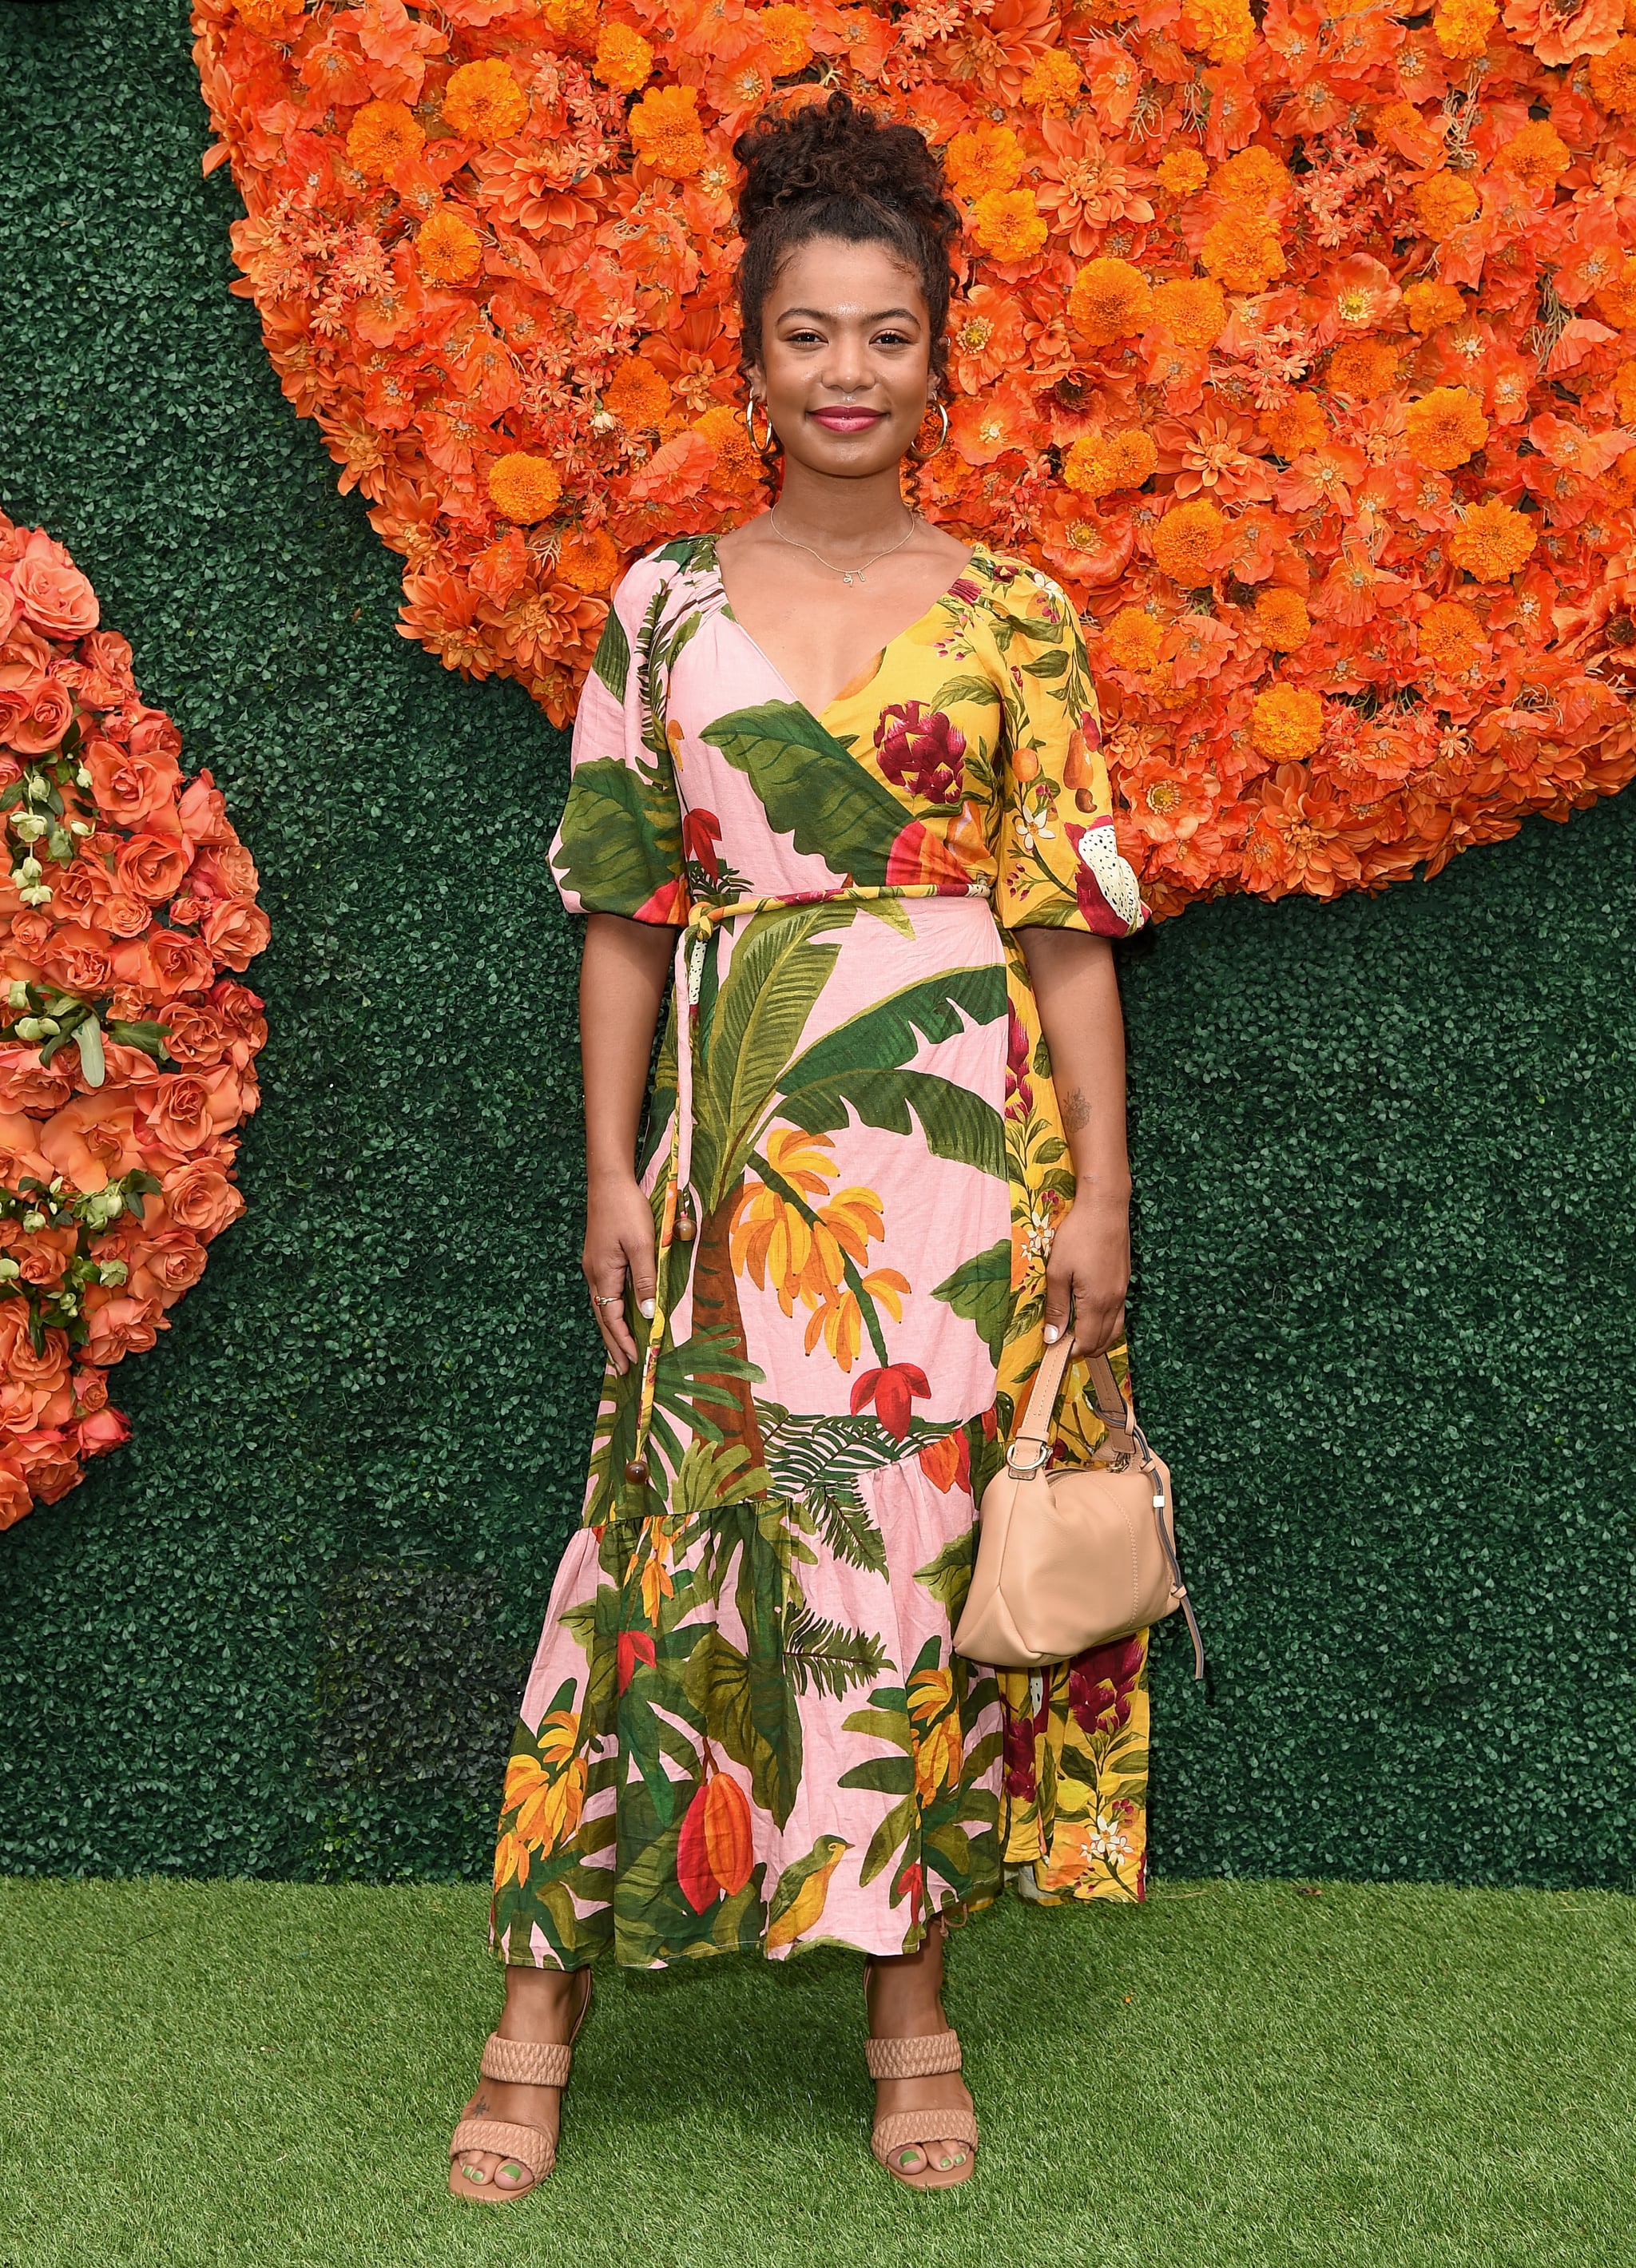 PACIFIC PALISADES, CALIFORNIA - OCTOBER 02: Jaz Sinclair attends the Veuve Clicquot Polo Classic at Will Rogers State Historic Park on October 02, 2021 in Pacific Palisades, California. (Photo by Axelle/Bauer-Griffin/FilmMagic)